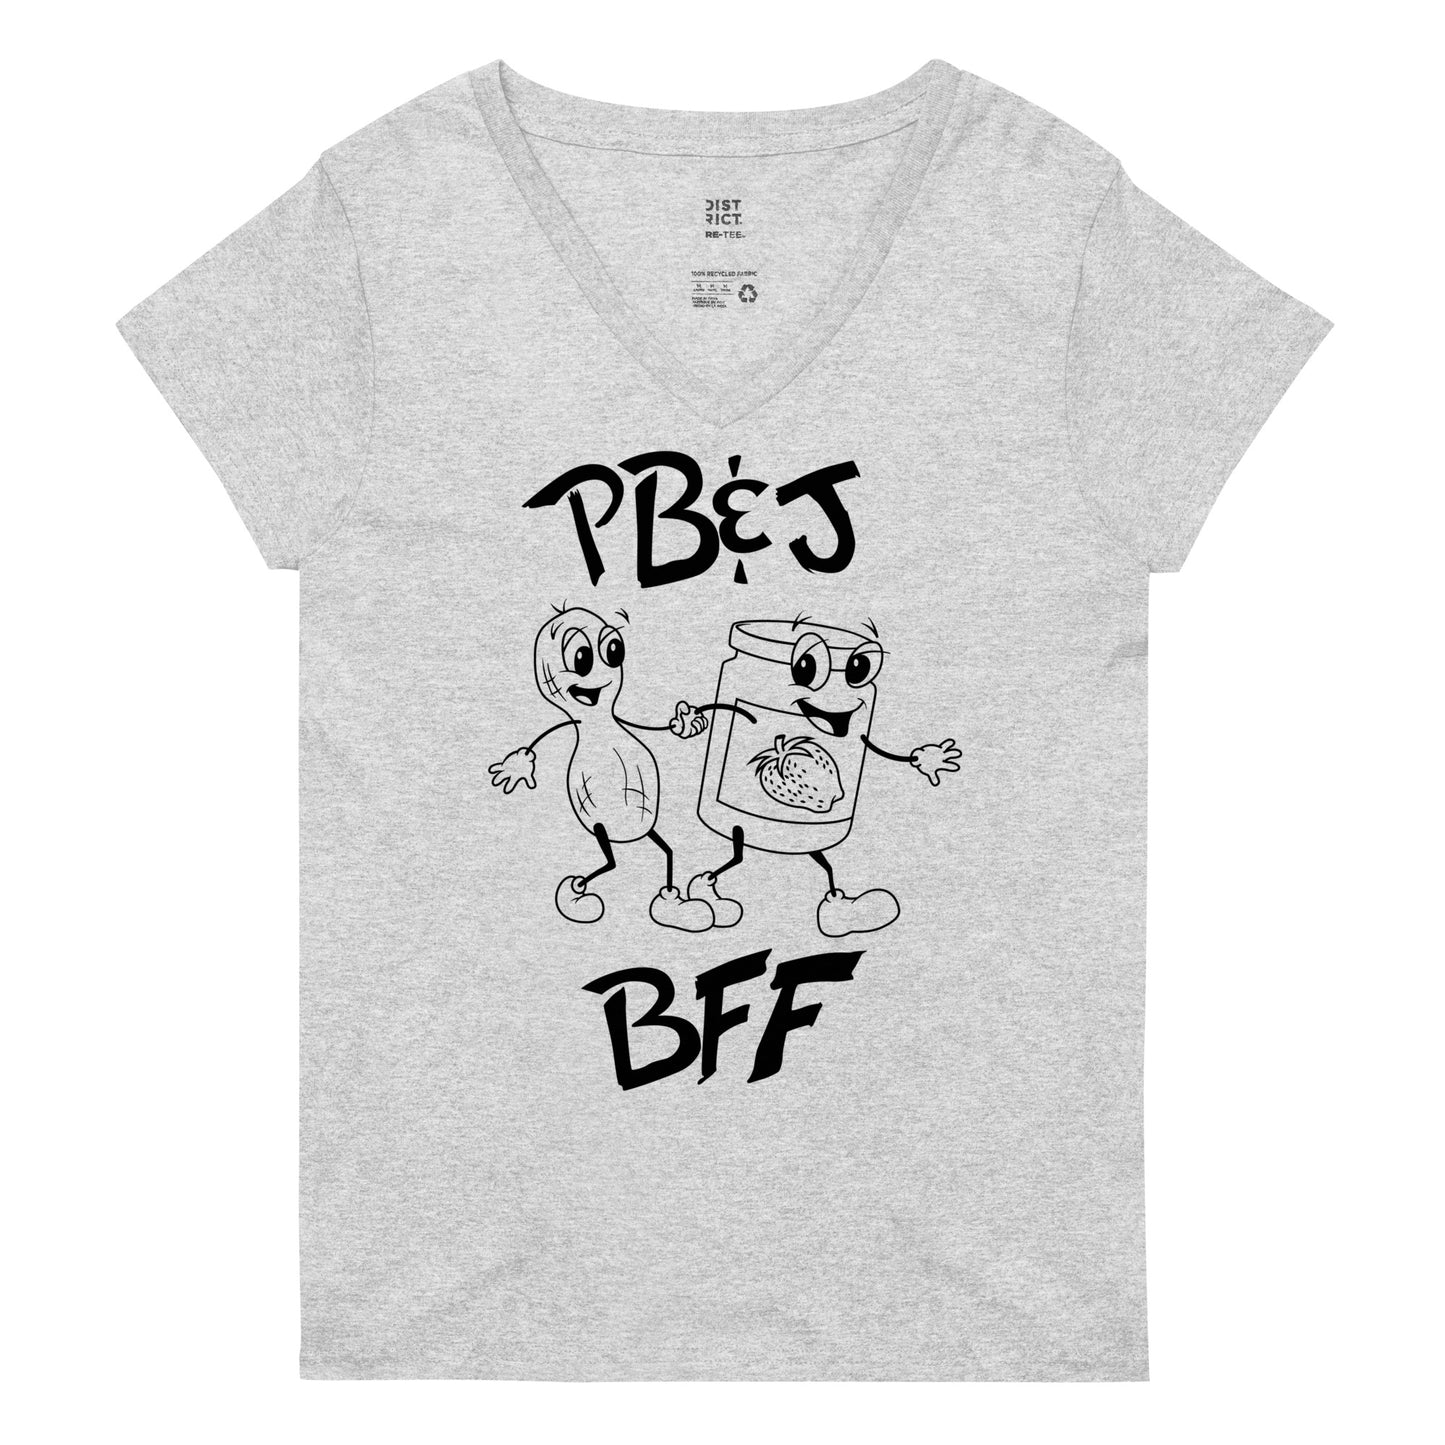 Peanut Butter And Jelly - BFF Women's V-Neck Tee